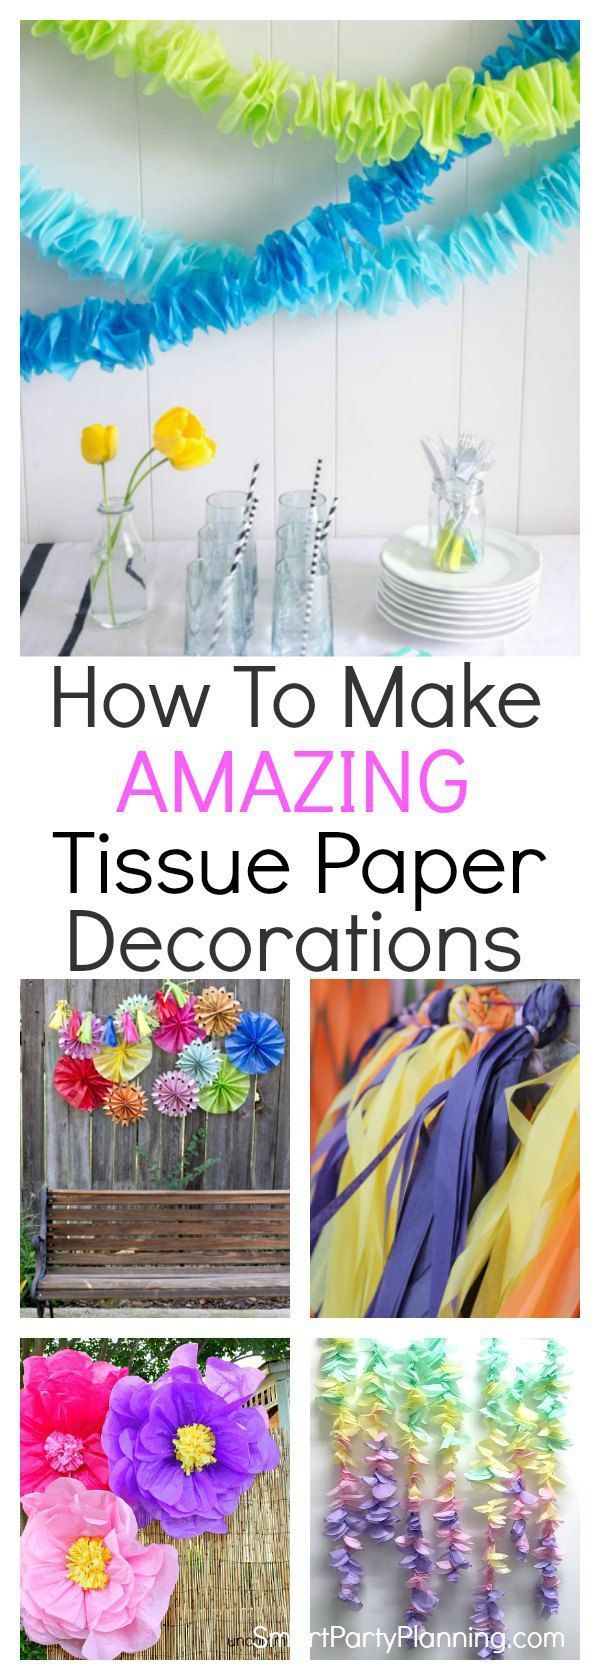 How To Make Amazing Tissue Paper Decorations -   17 diy projects Paper pom poms ideas